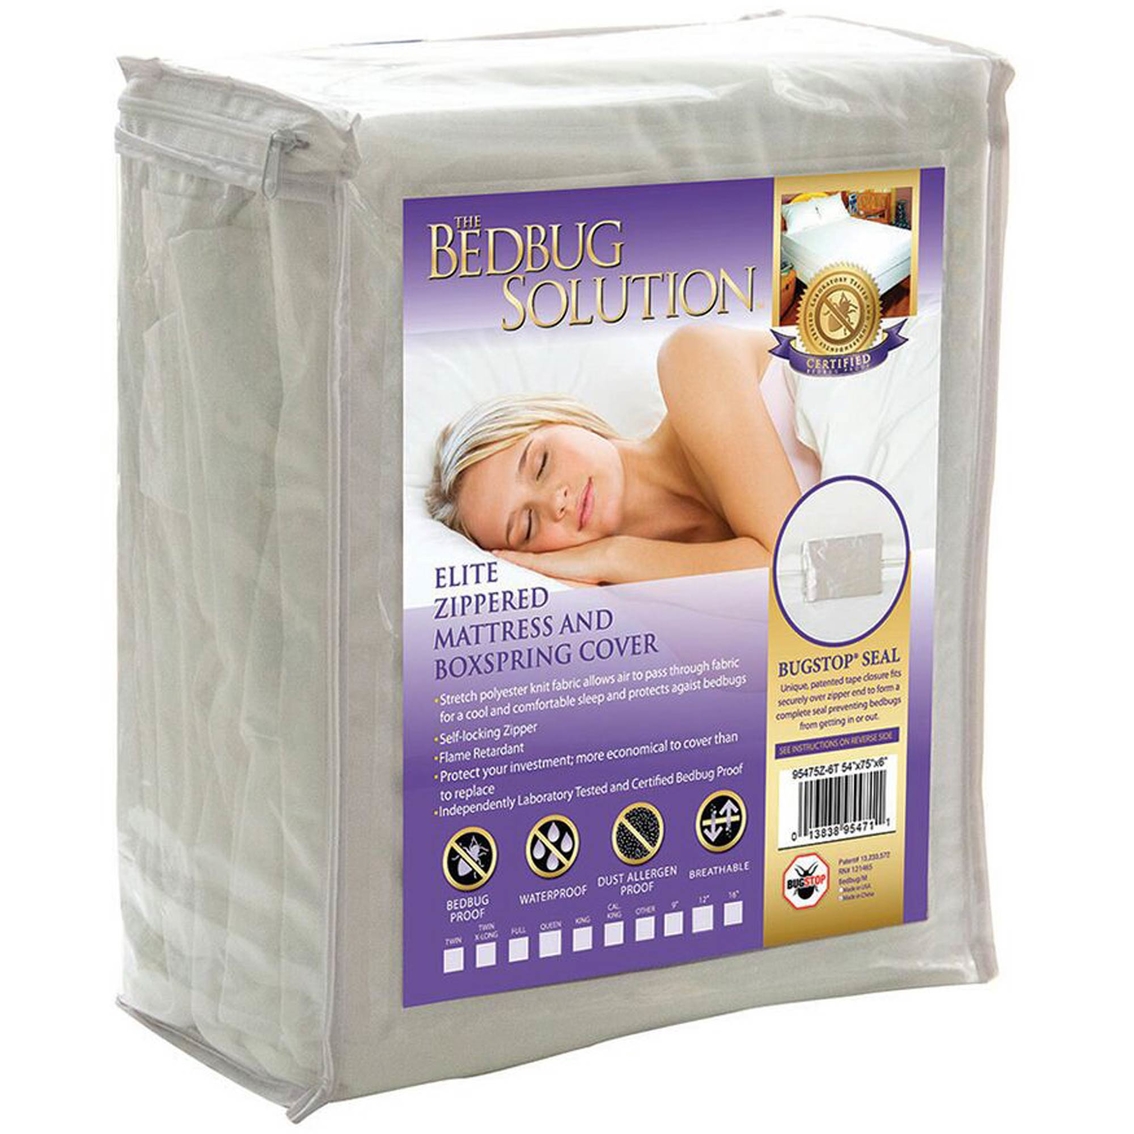 The BedBug Solution Elite 12 in. Deep Mattress Cover - Image 3 of 3